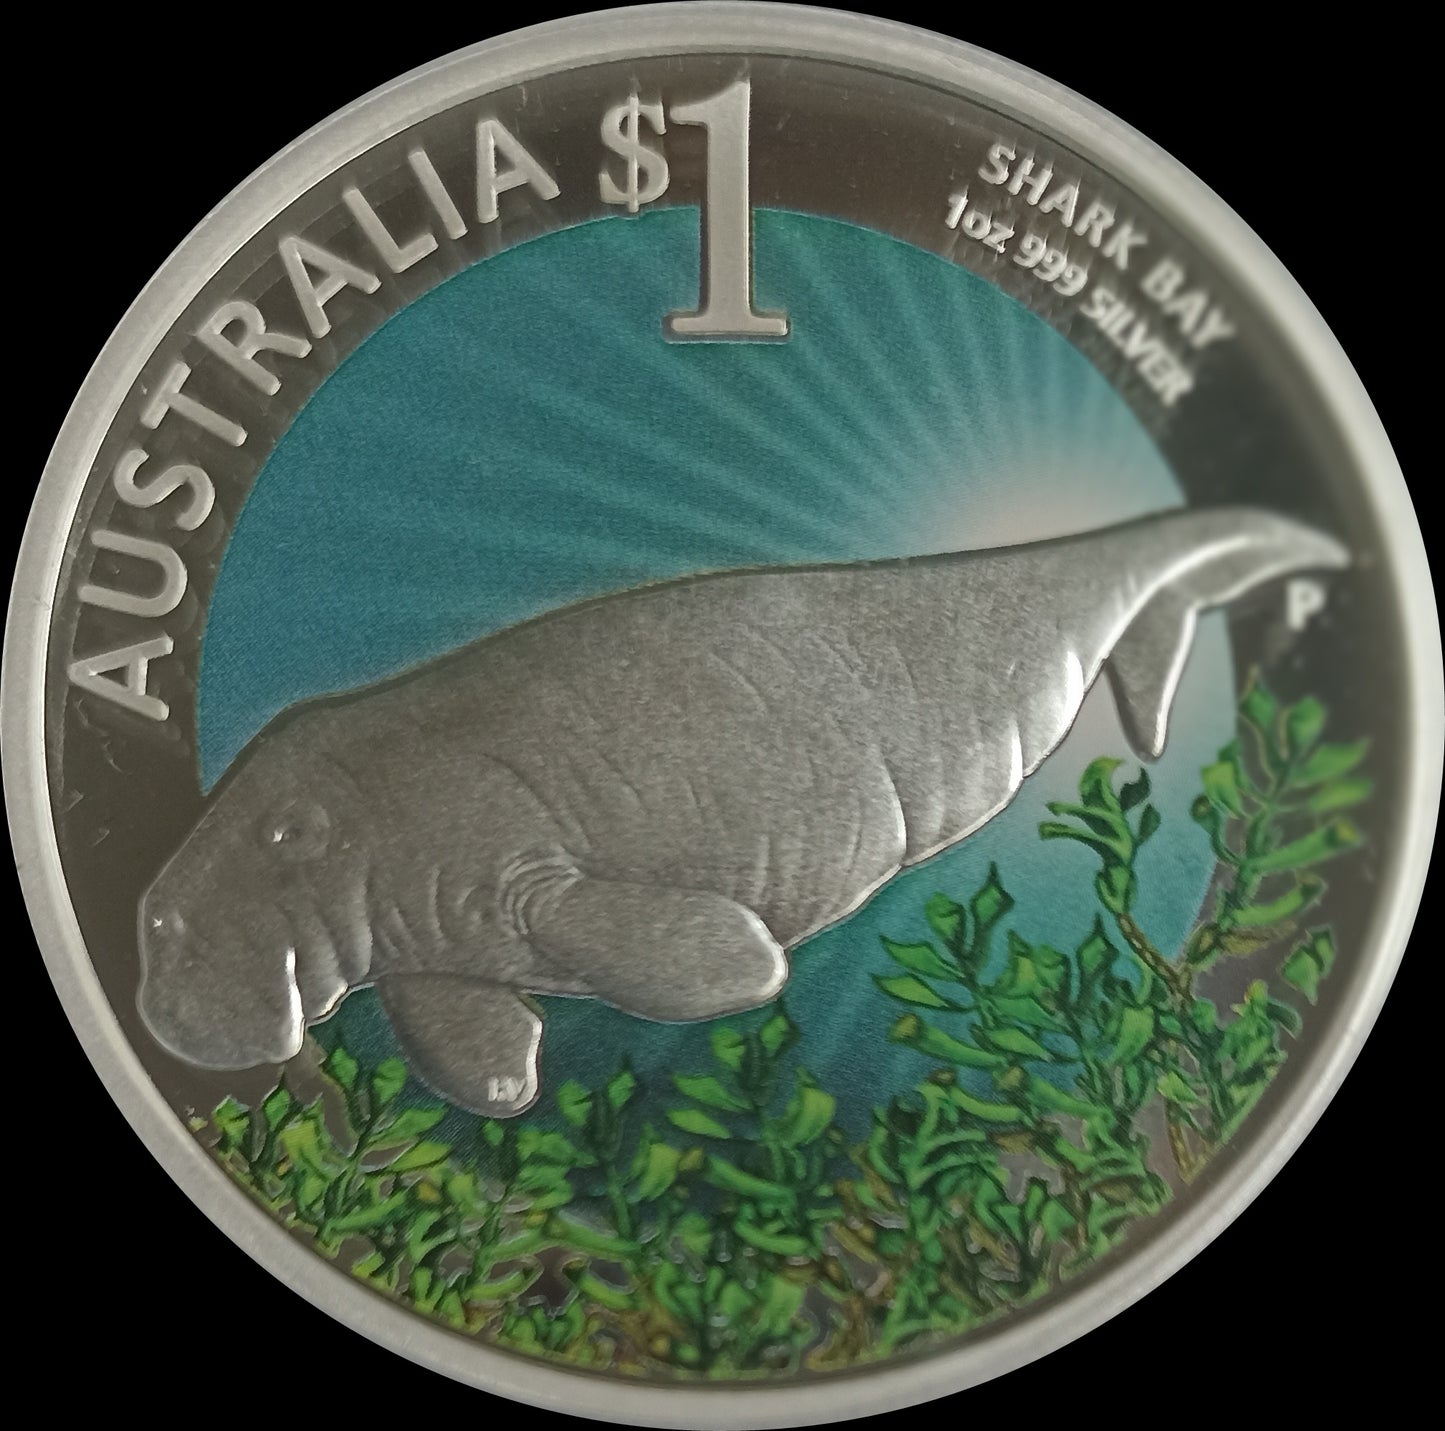 SHARK BAY, World Heritage Sites series, 1 oz Silver Colored Proof, 2012